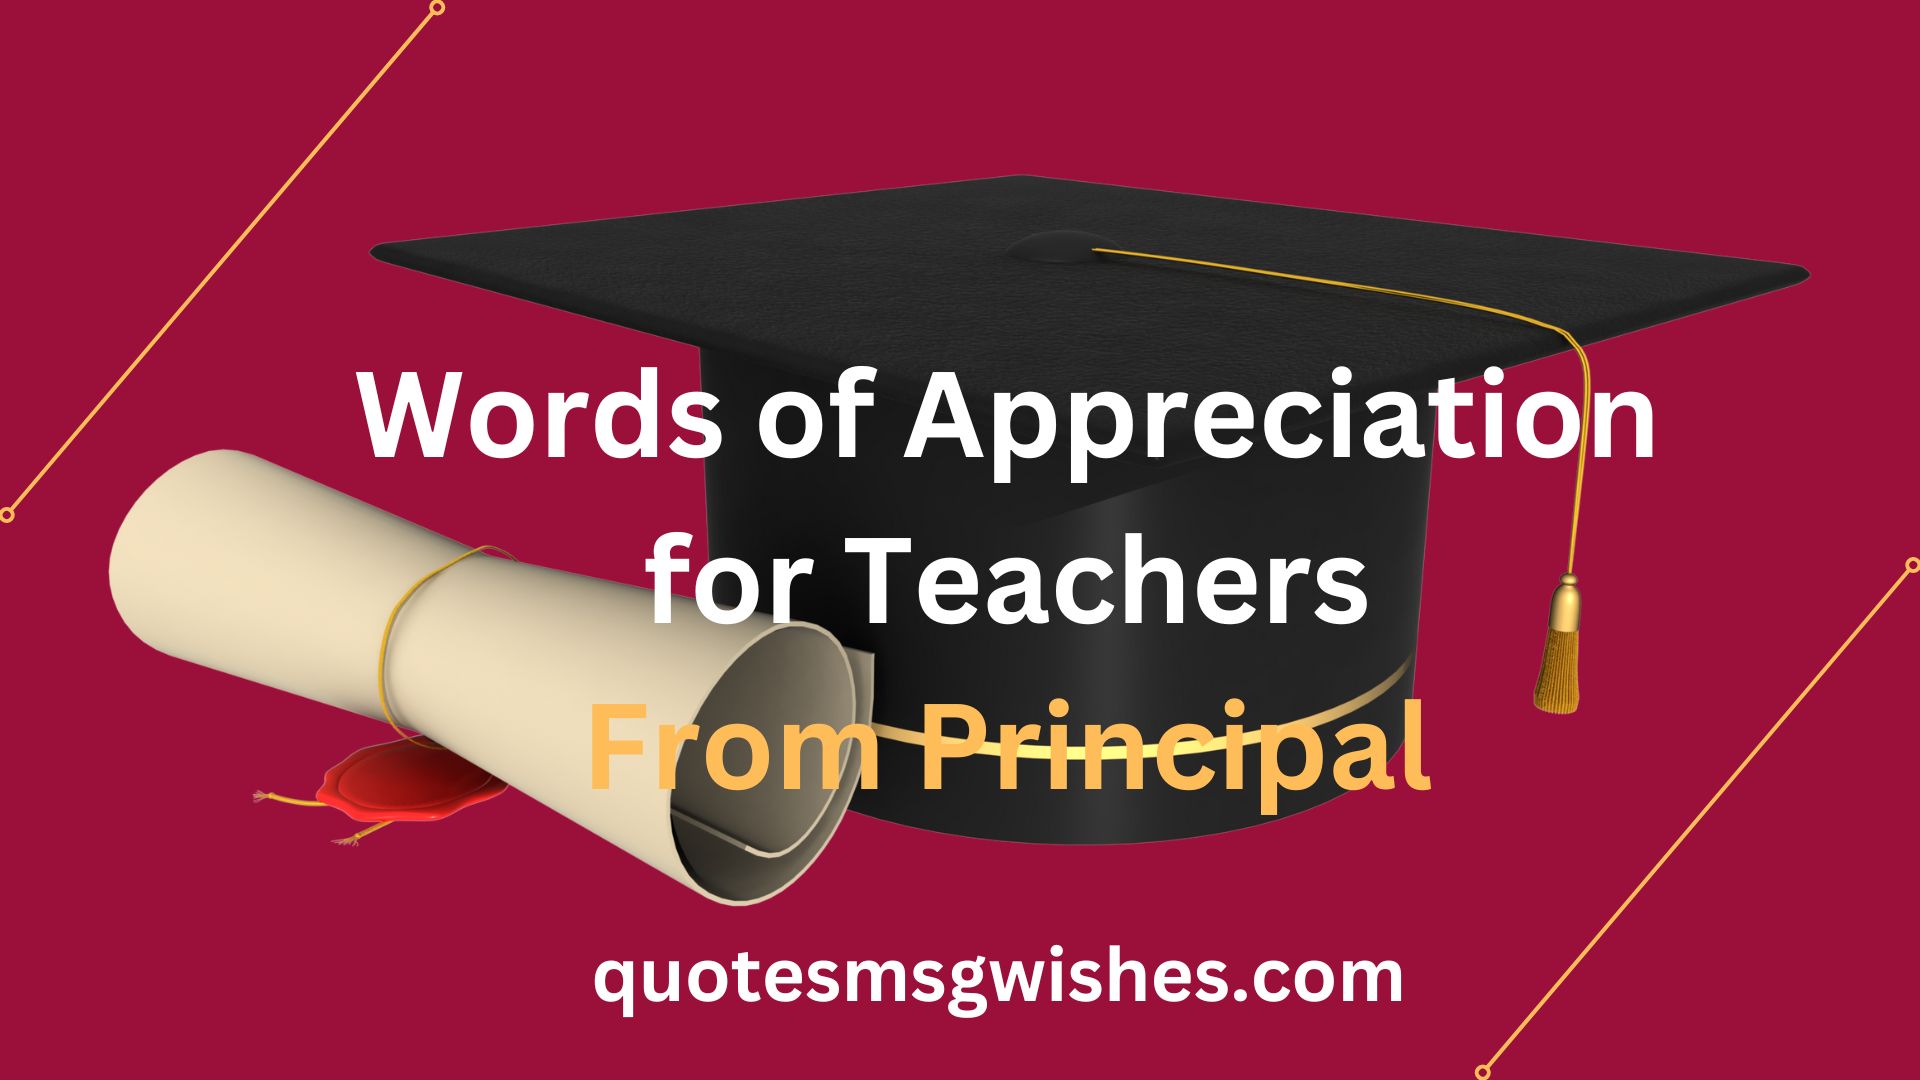 Words of Appreciation for Teachers From Principal